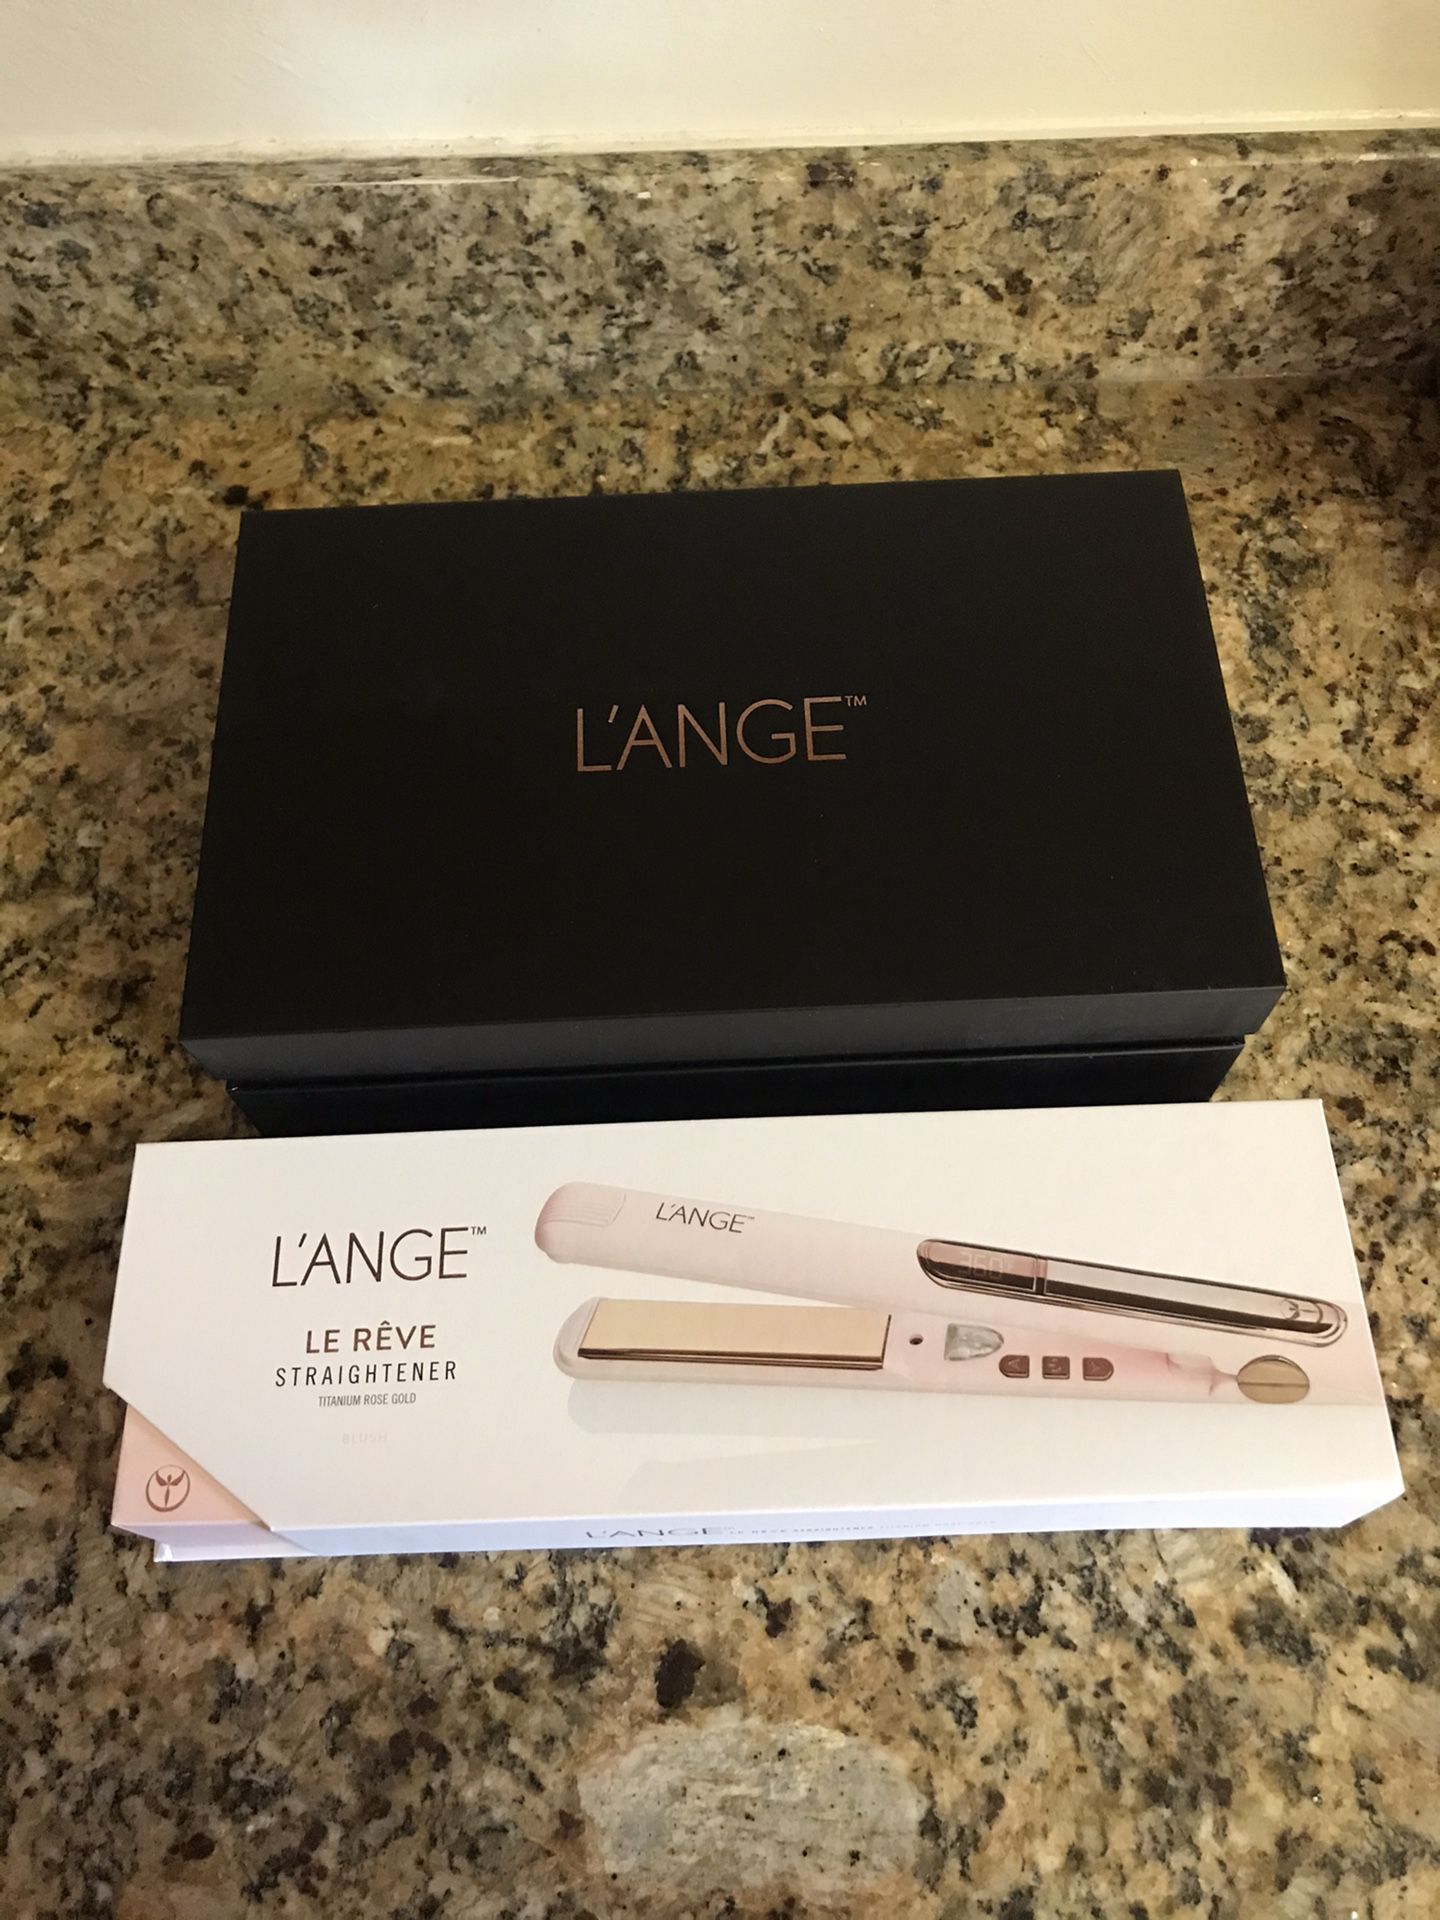 L’ANGE Straightener and Blow Dryer (Make an offer)